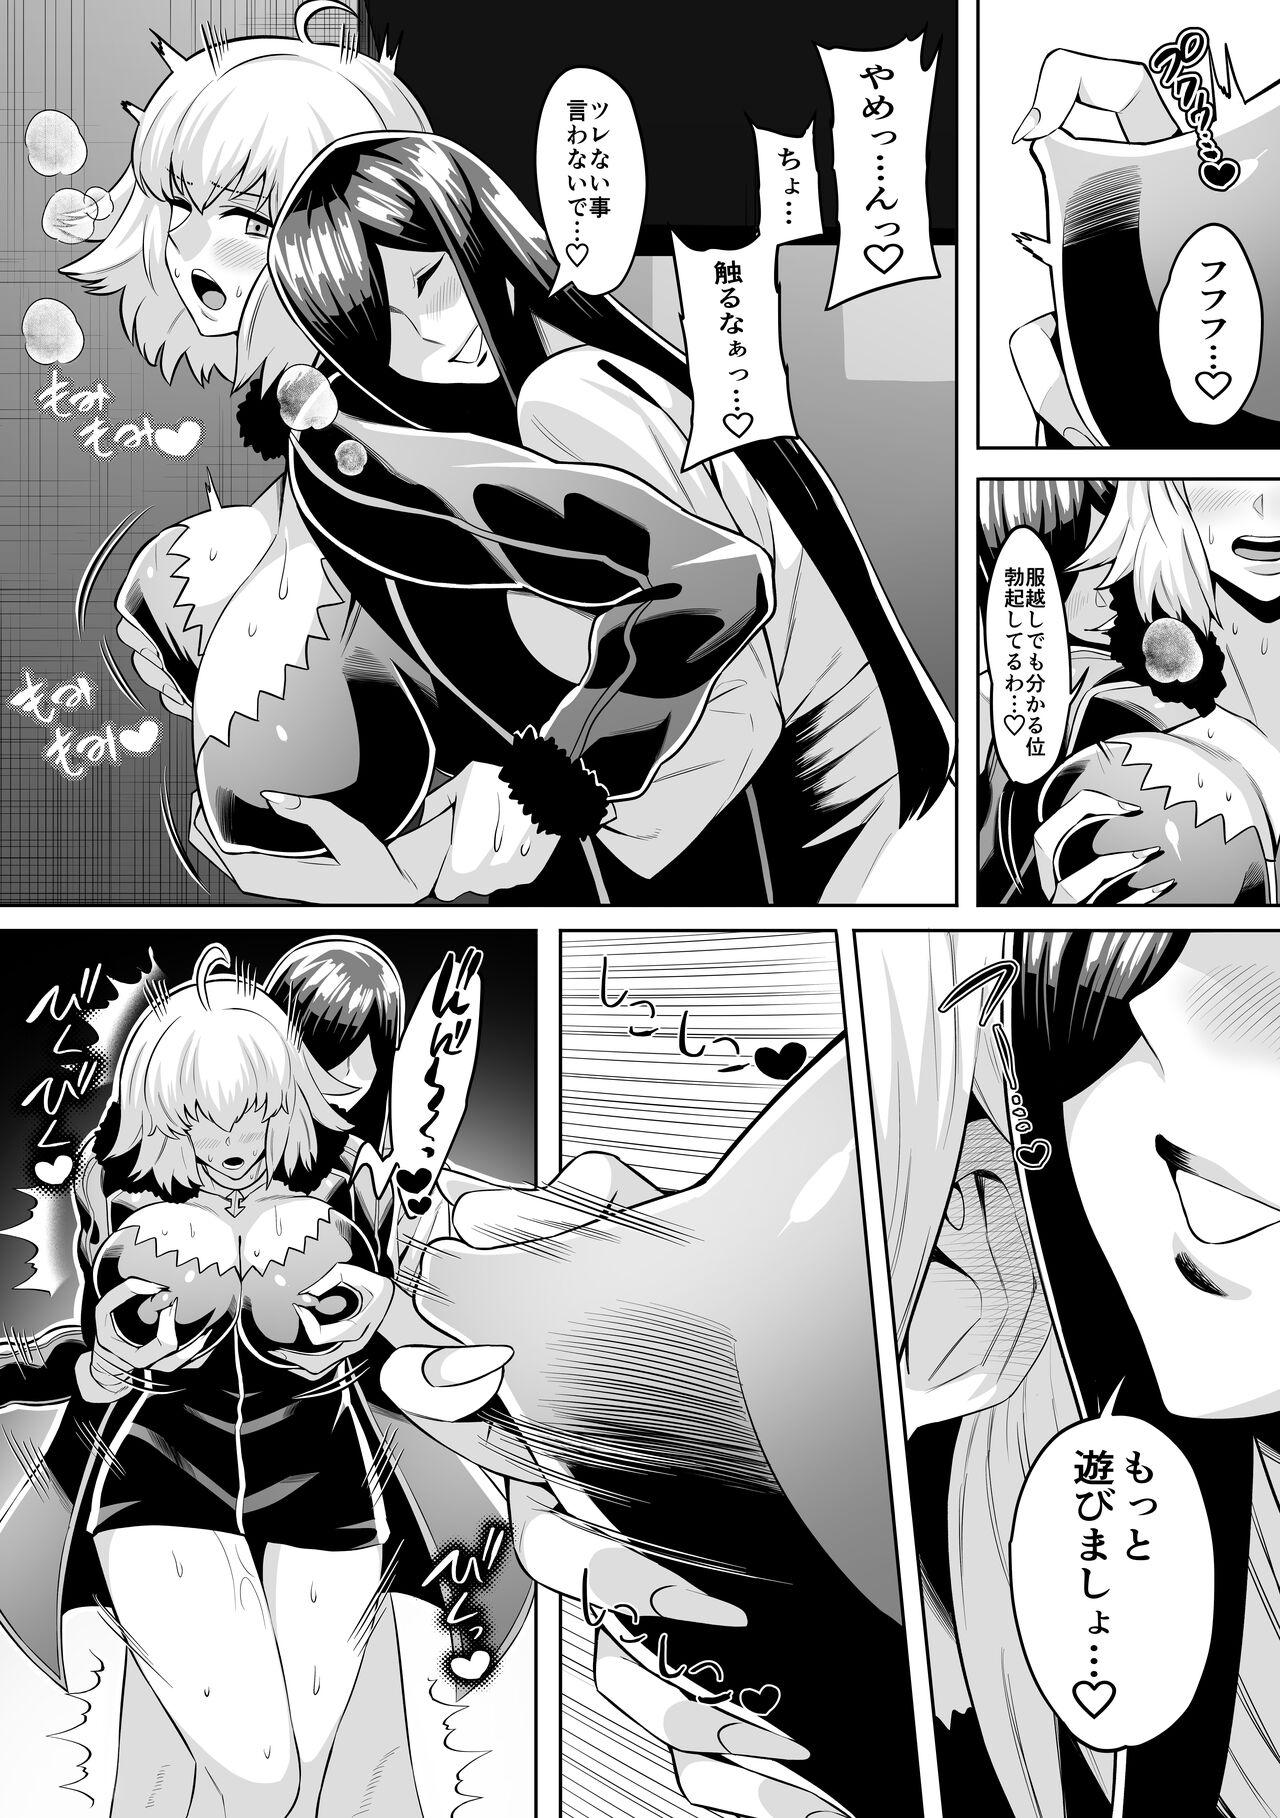 Sis ジャンヌオルタ - Fate grand order Sologirl - Page 5